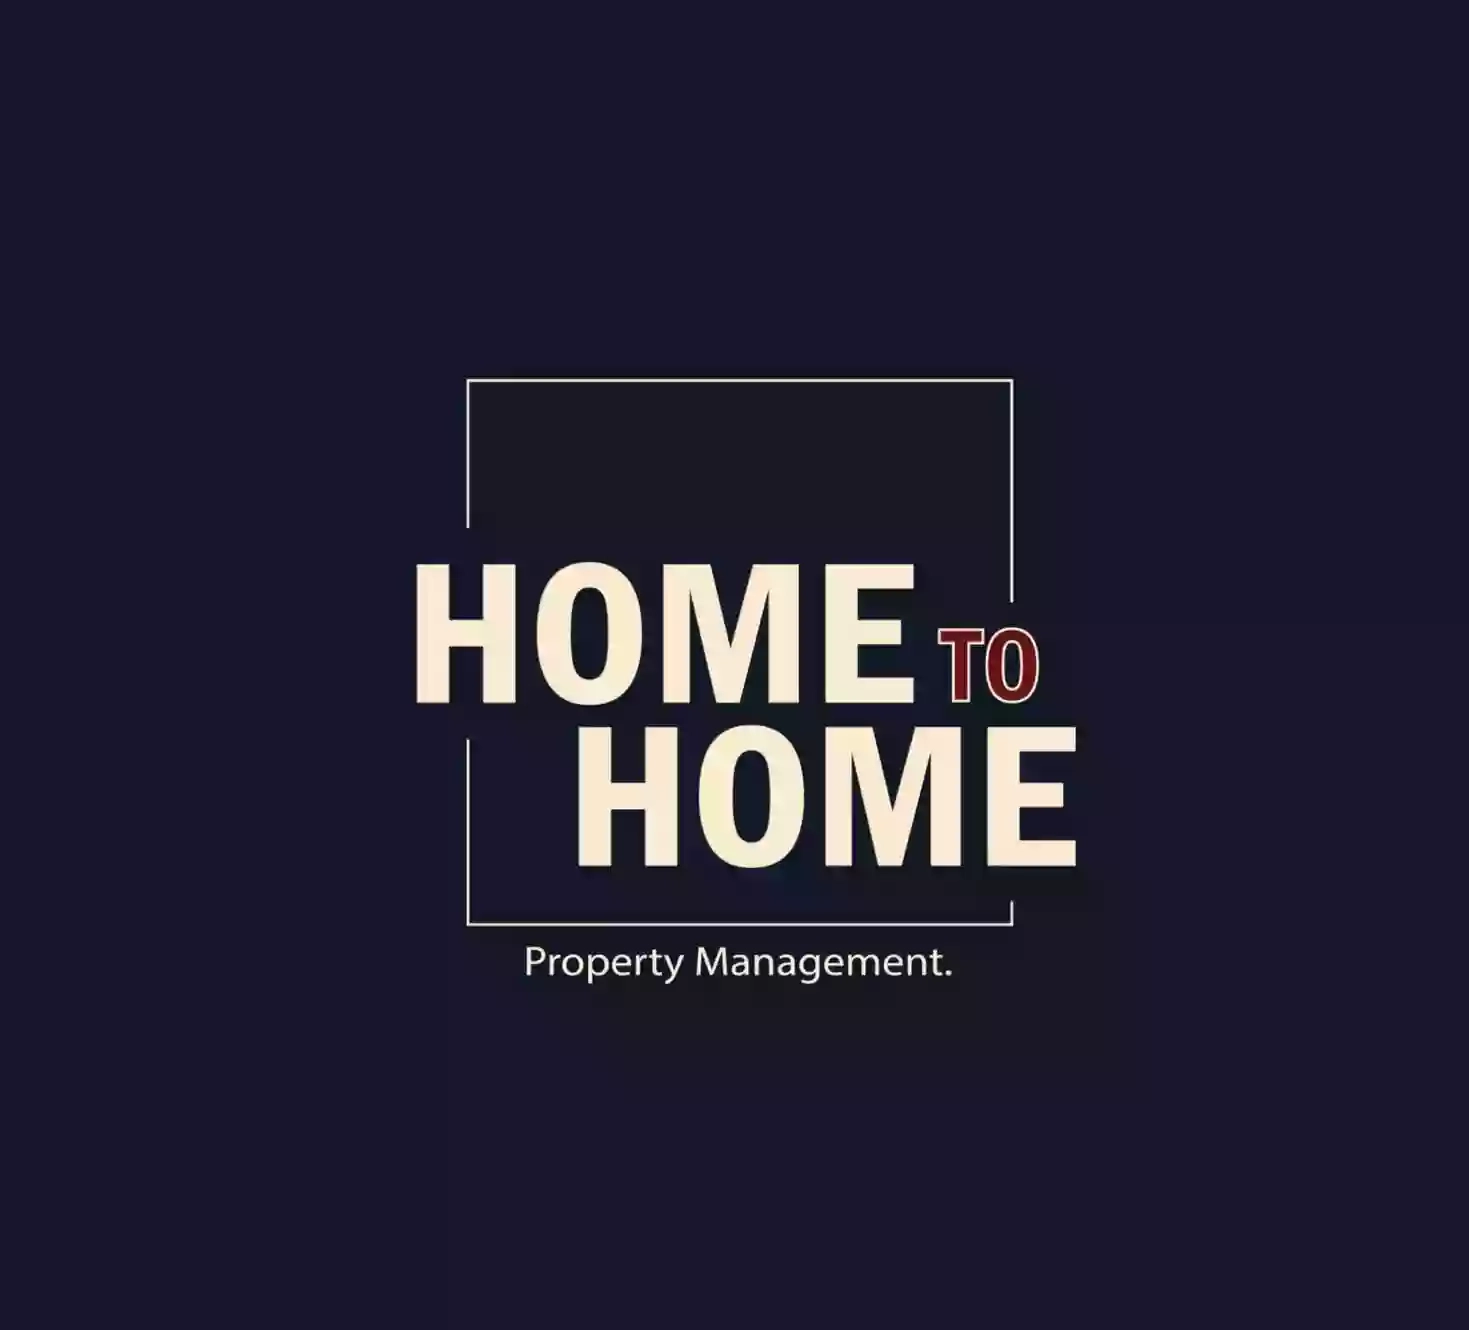 Home to Home Property Management